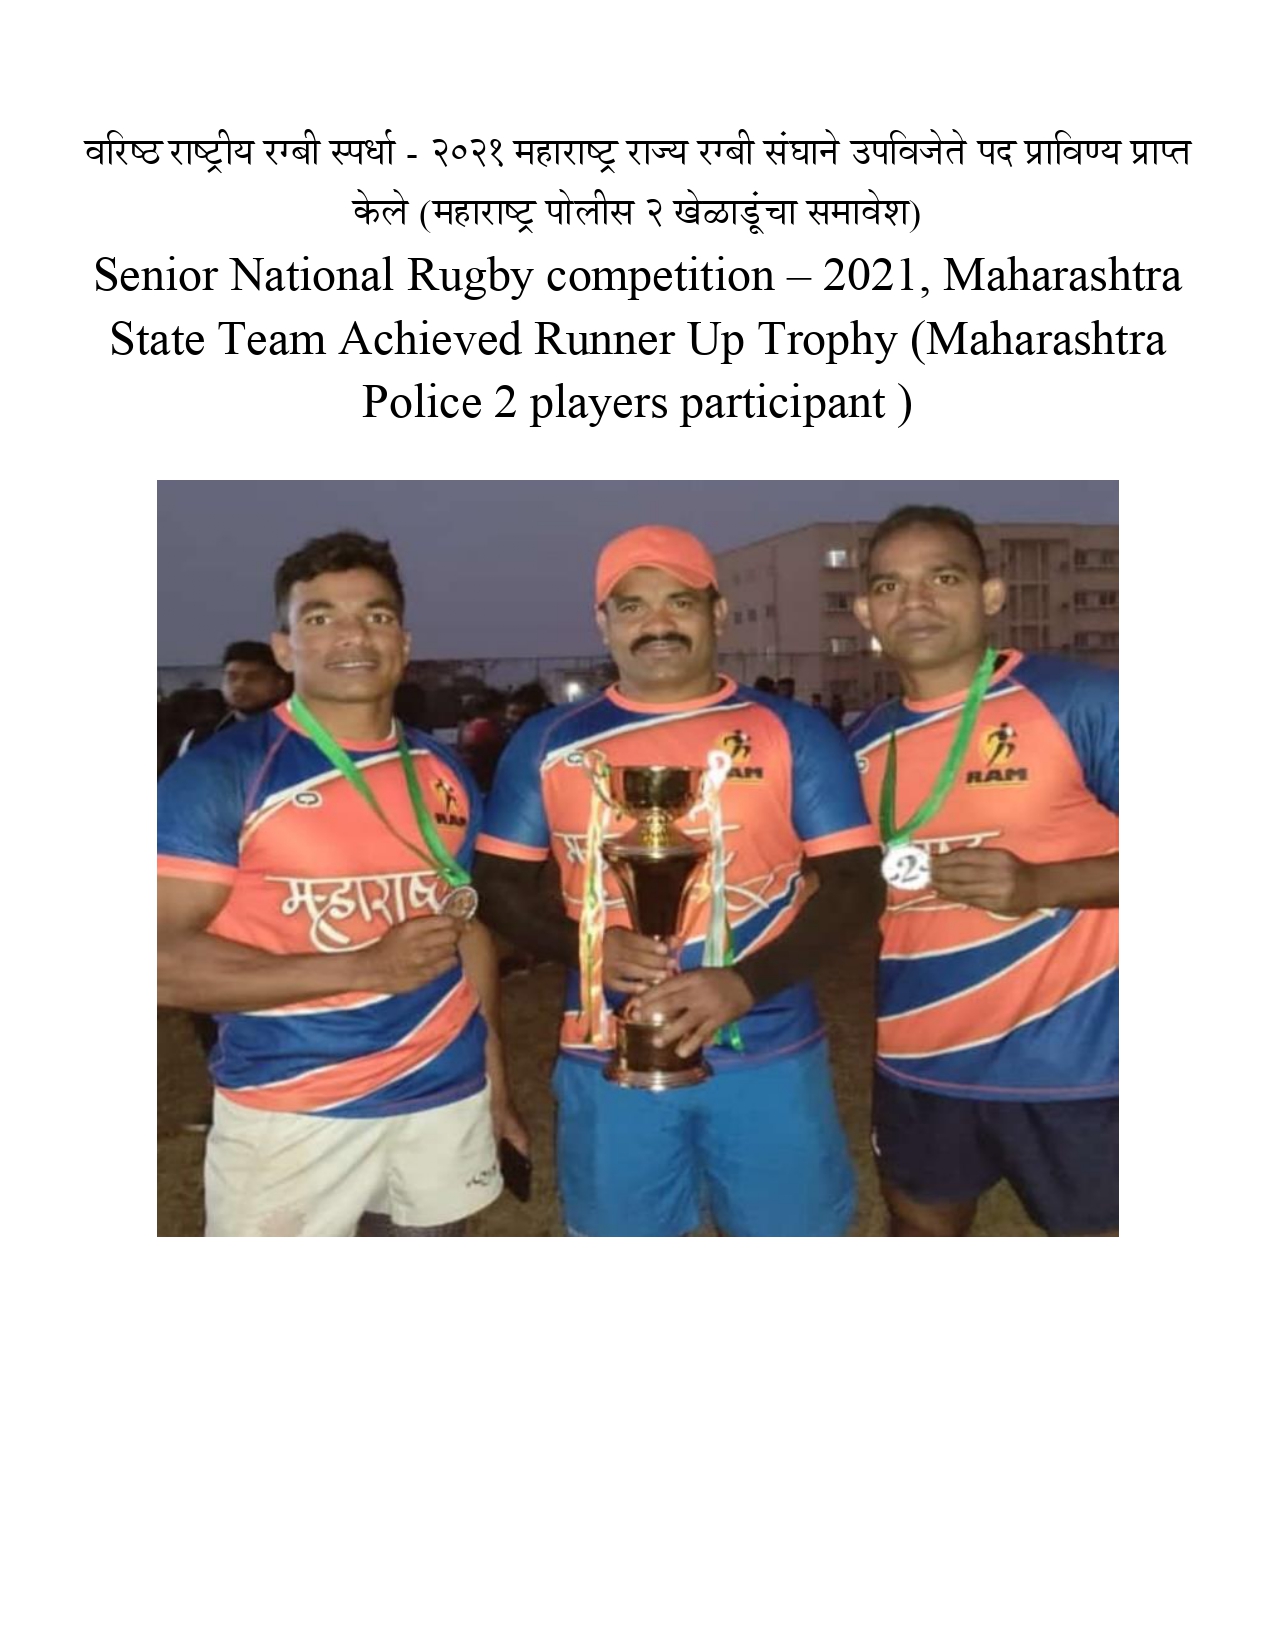 SENIOR NATIONAL RUGBY COMPETITION - 2021, MAHARASHTRA STATE TEAM ACHIEVED RUNNER UP TROPHY ( MAHARASHTRA POLICE 2 PLAYERS PARTICIPANT)